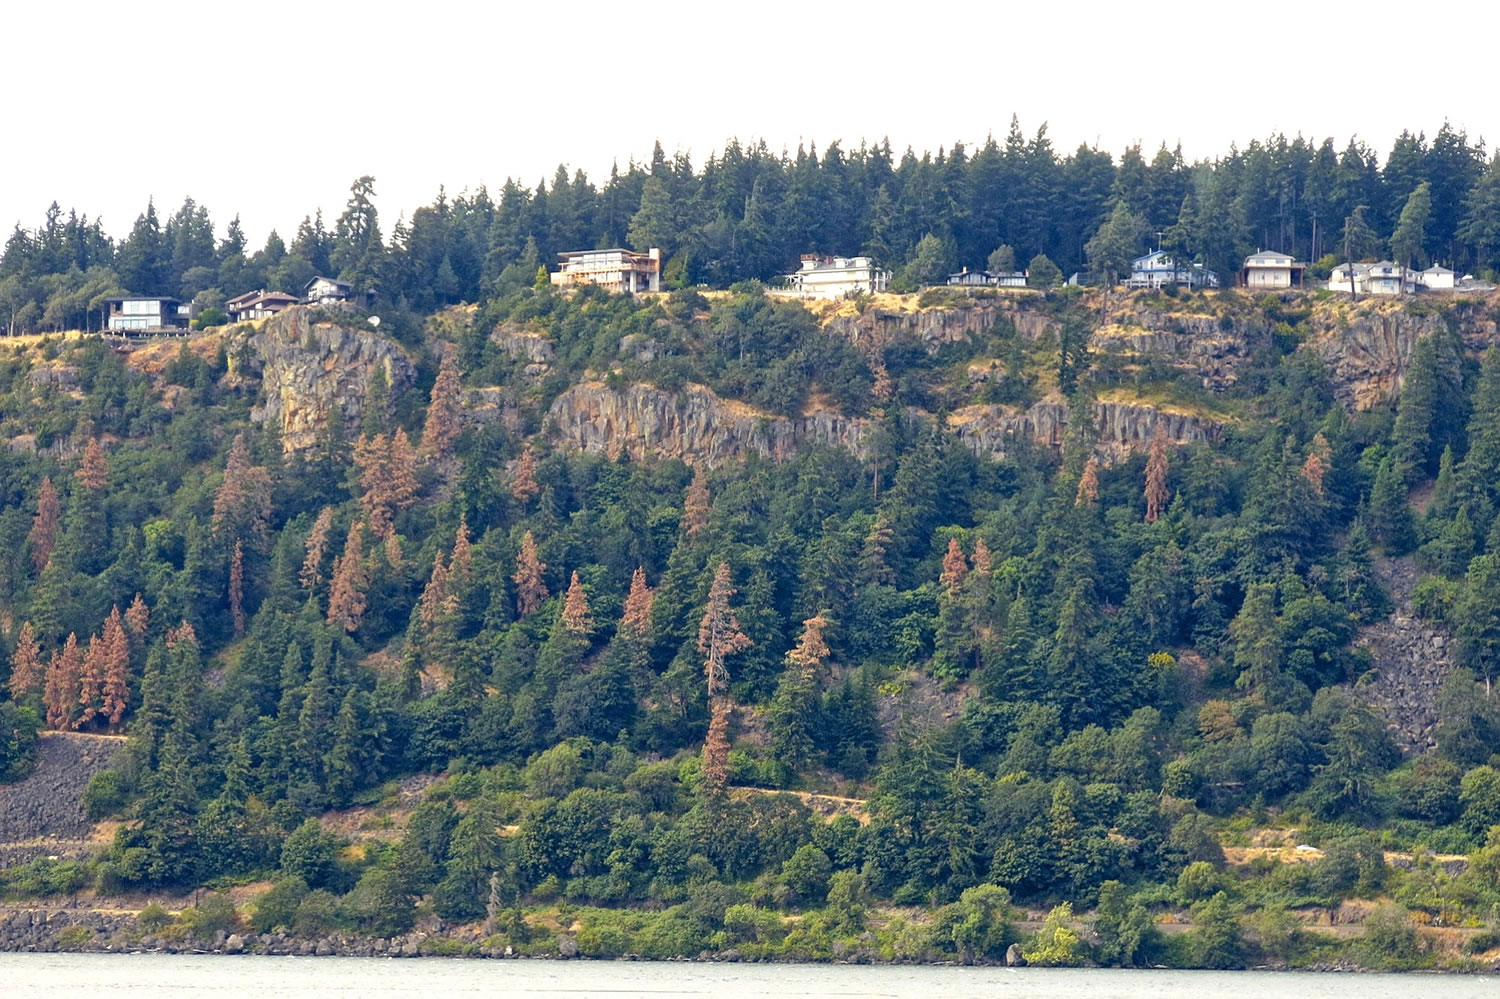 Dead pine trees dot the landscape, looking across the Columbia River to White Salmon.